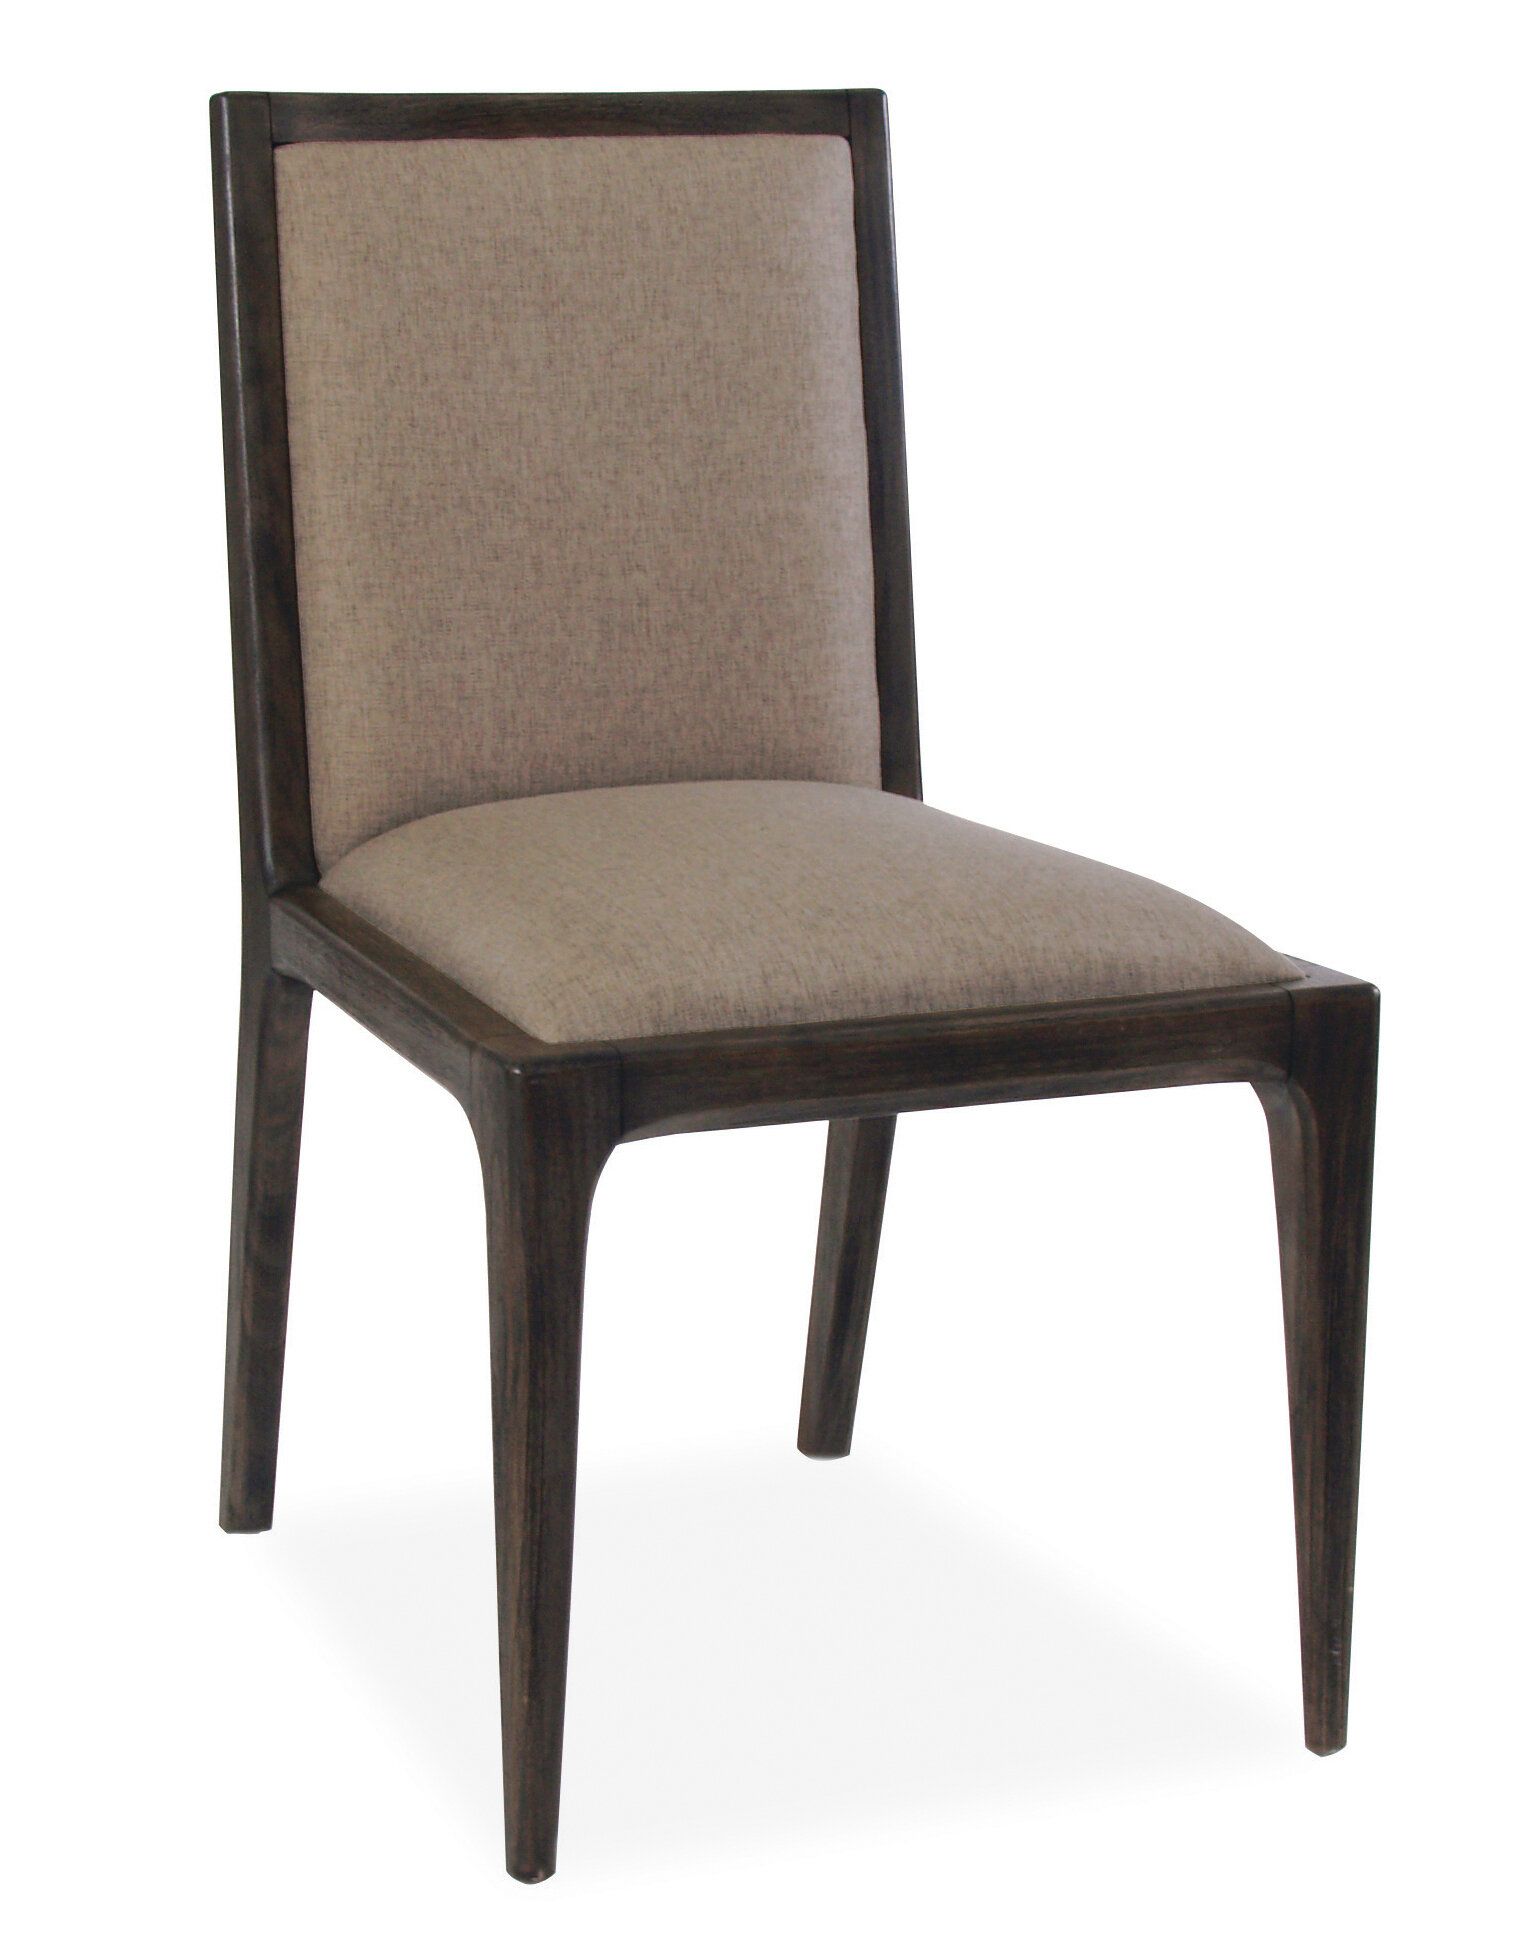 Messina Upholstered Dining Chair Within Messina Garden Stools Set (Set Of 2) (View 20 of 25)